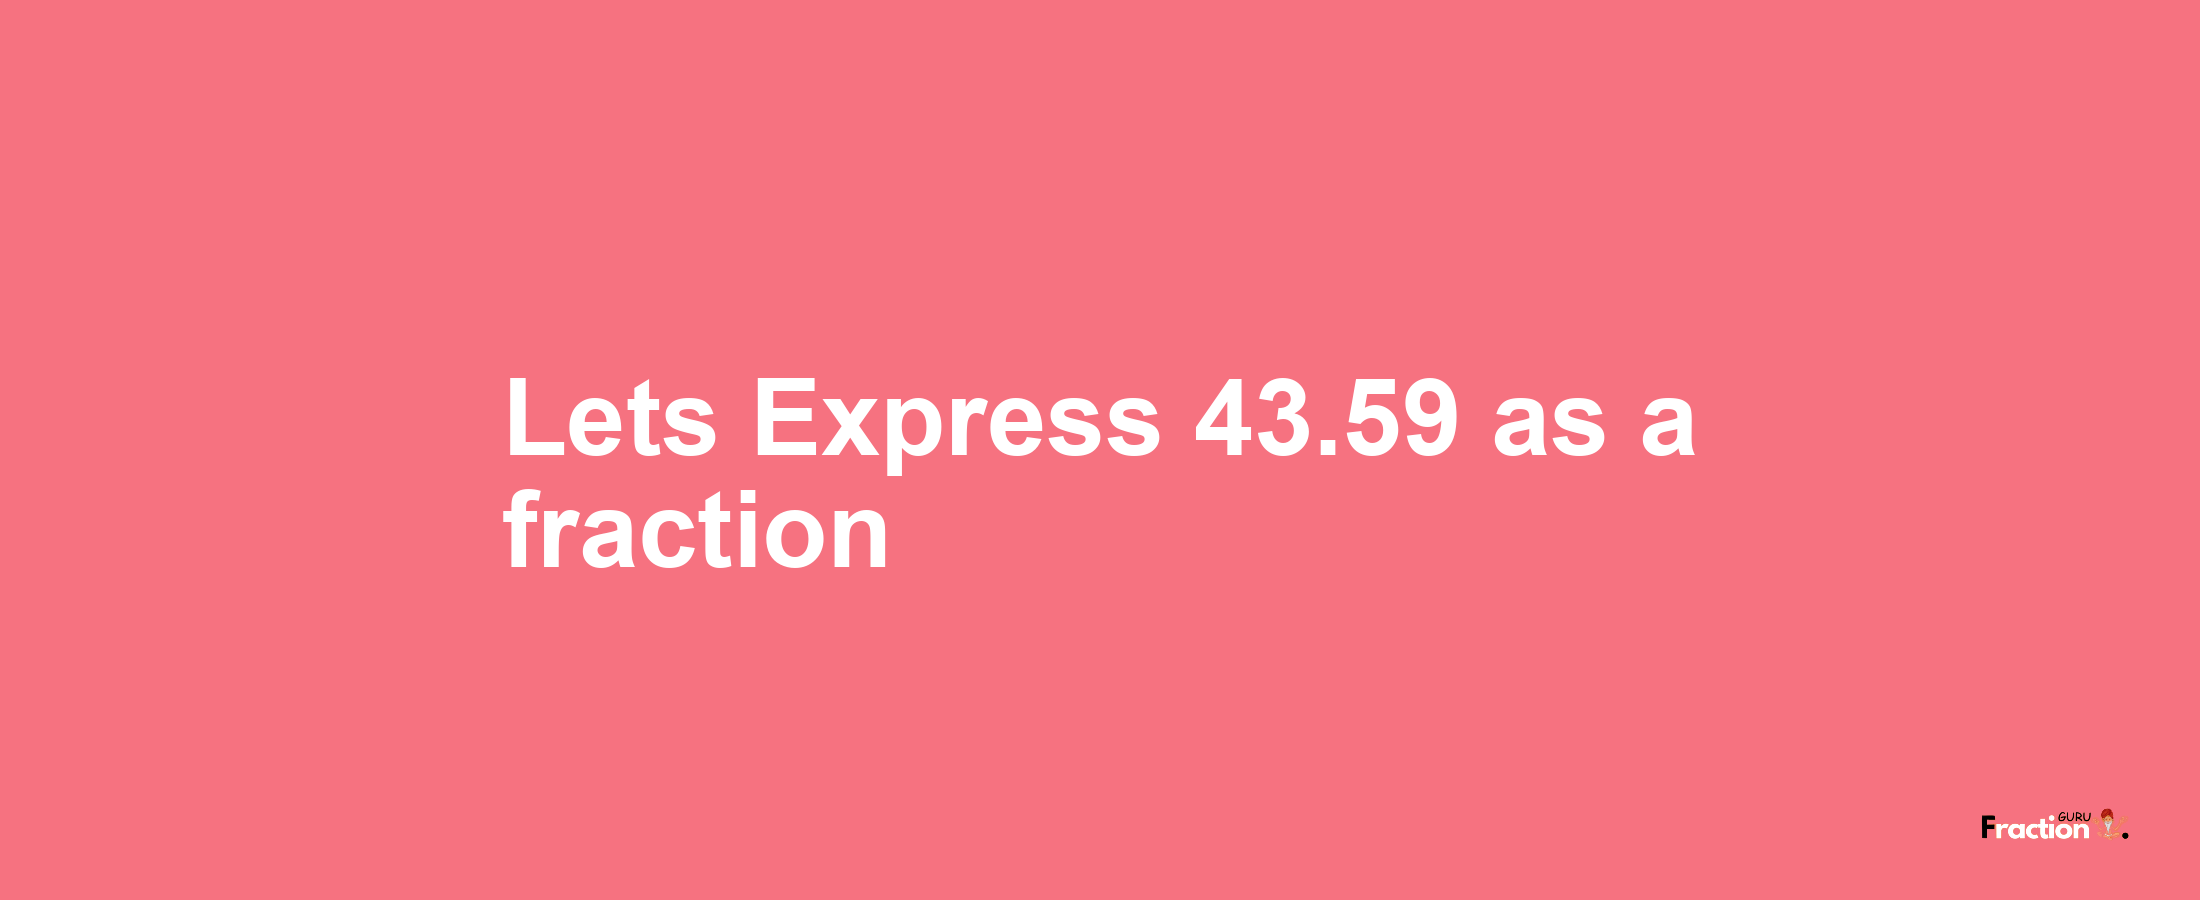 Lets Express 43.59 as afraction